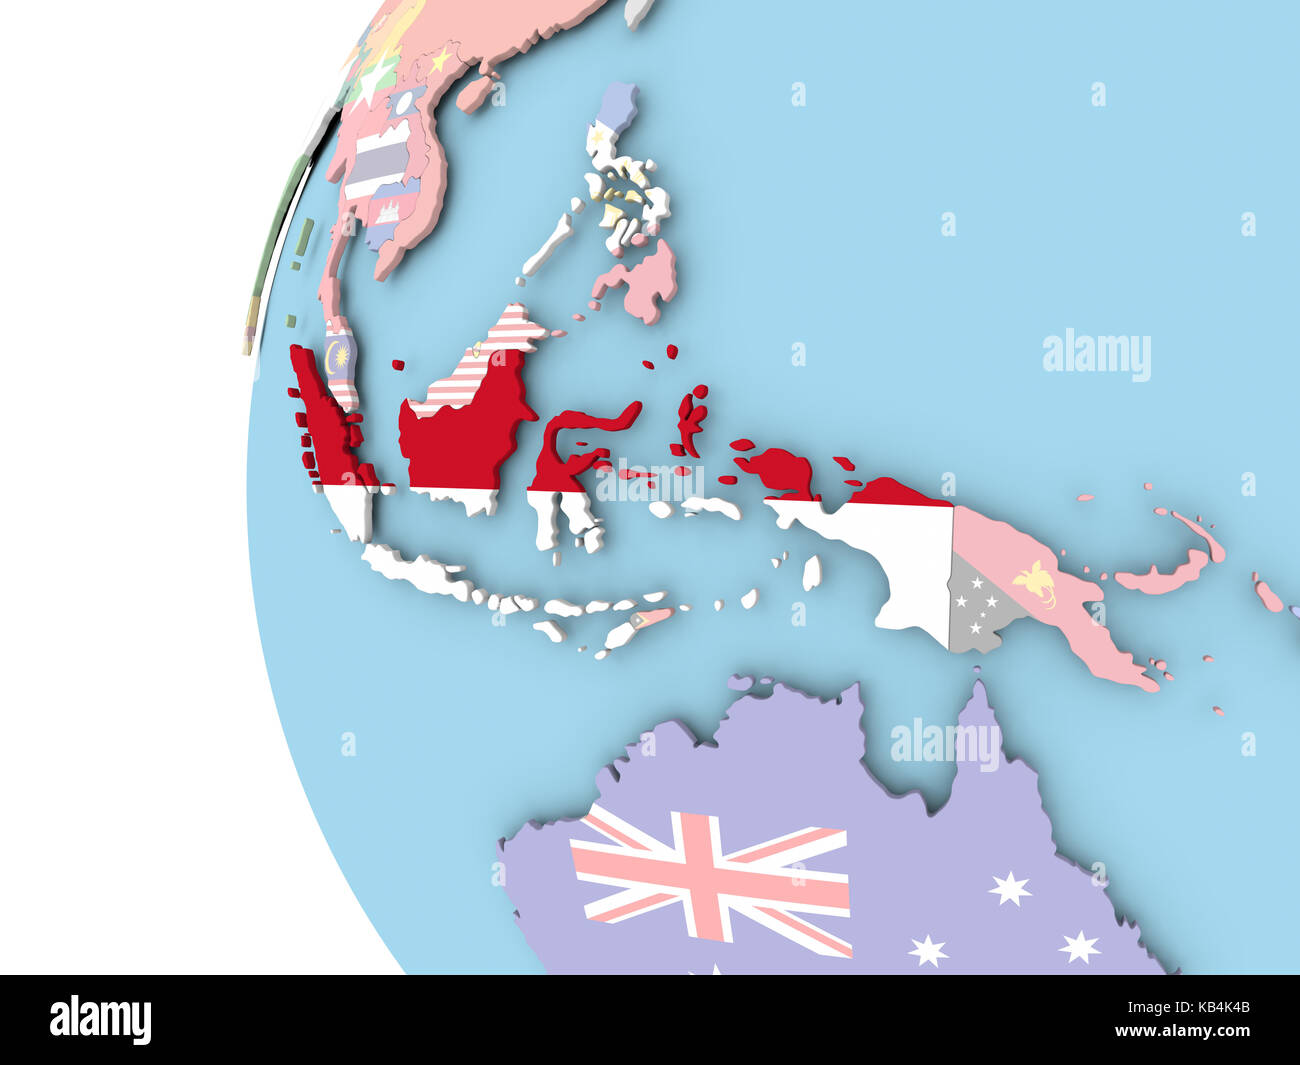 Indonesia on political globe with flag. 3D illustration. Stock Photo